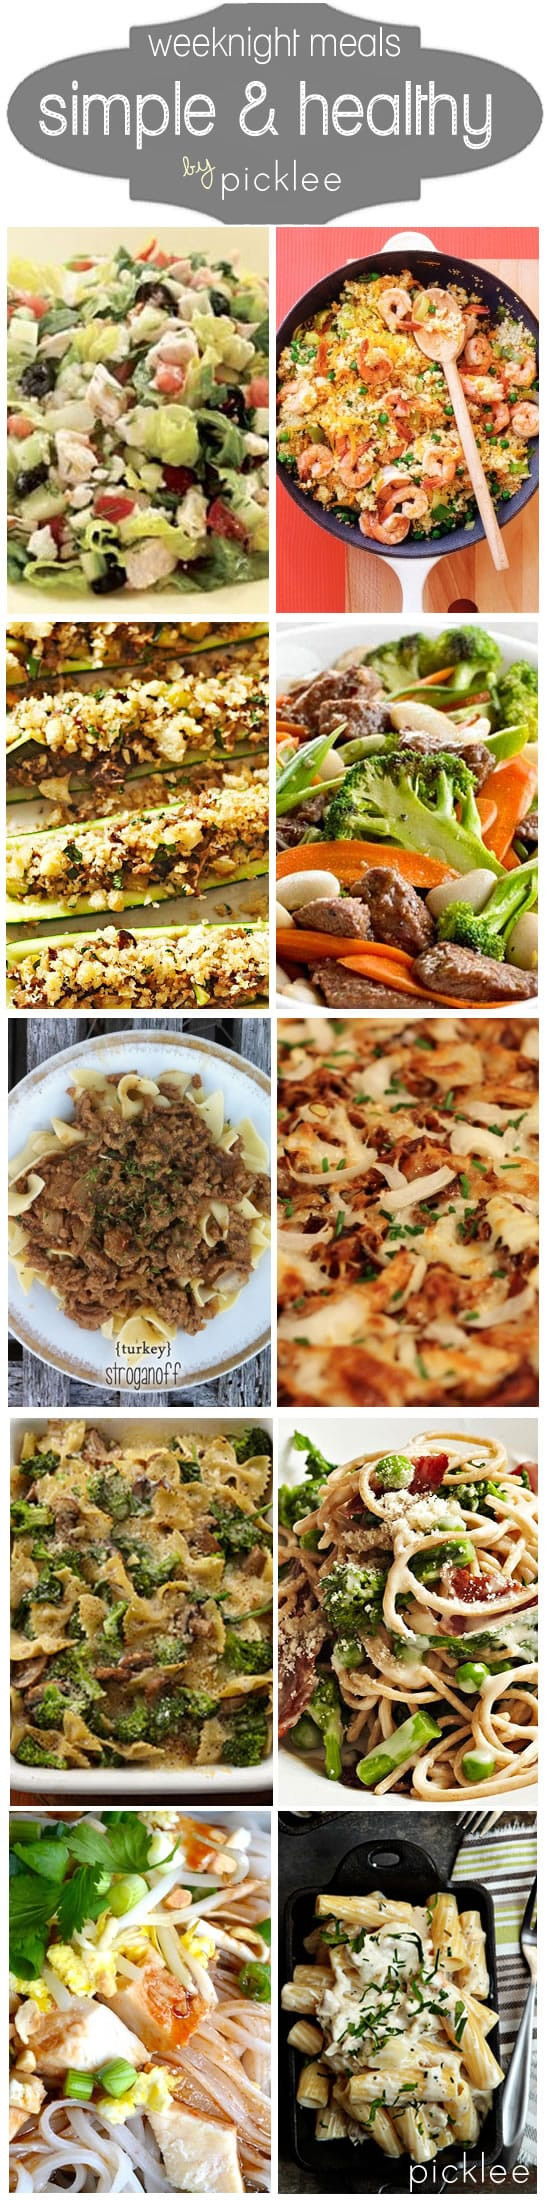 Easy Healthy Family Dinners
 10 Simple & Healthy Weeknight Dinners [recipes] Picklee